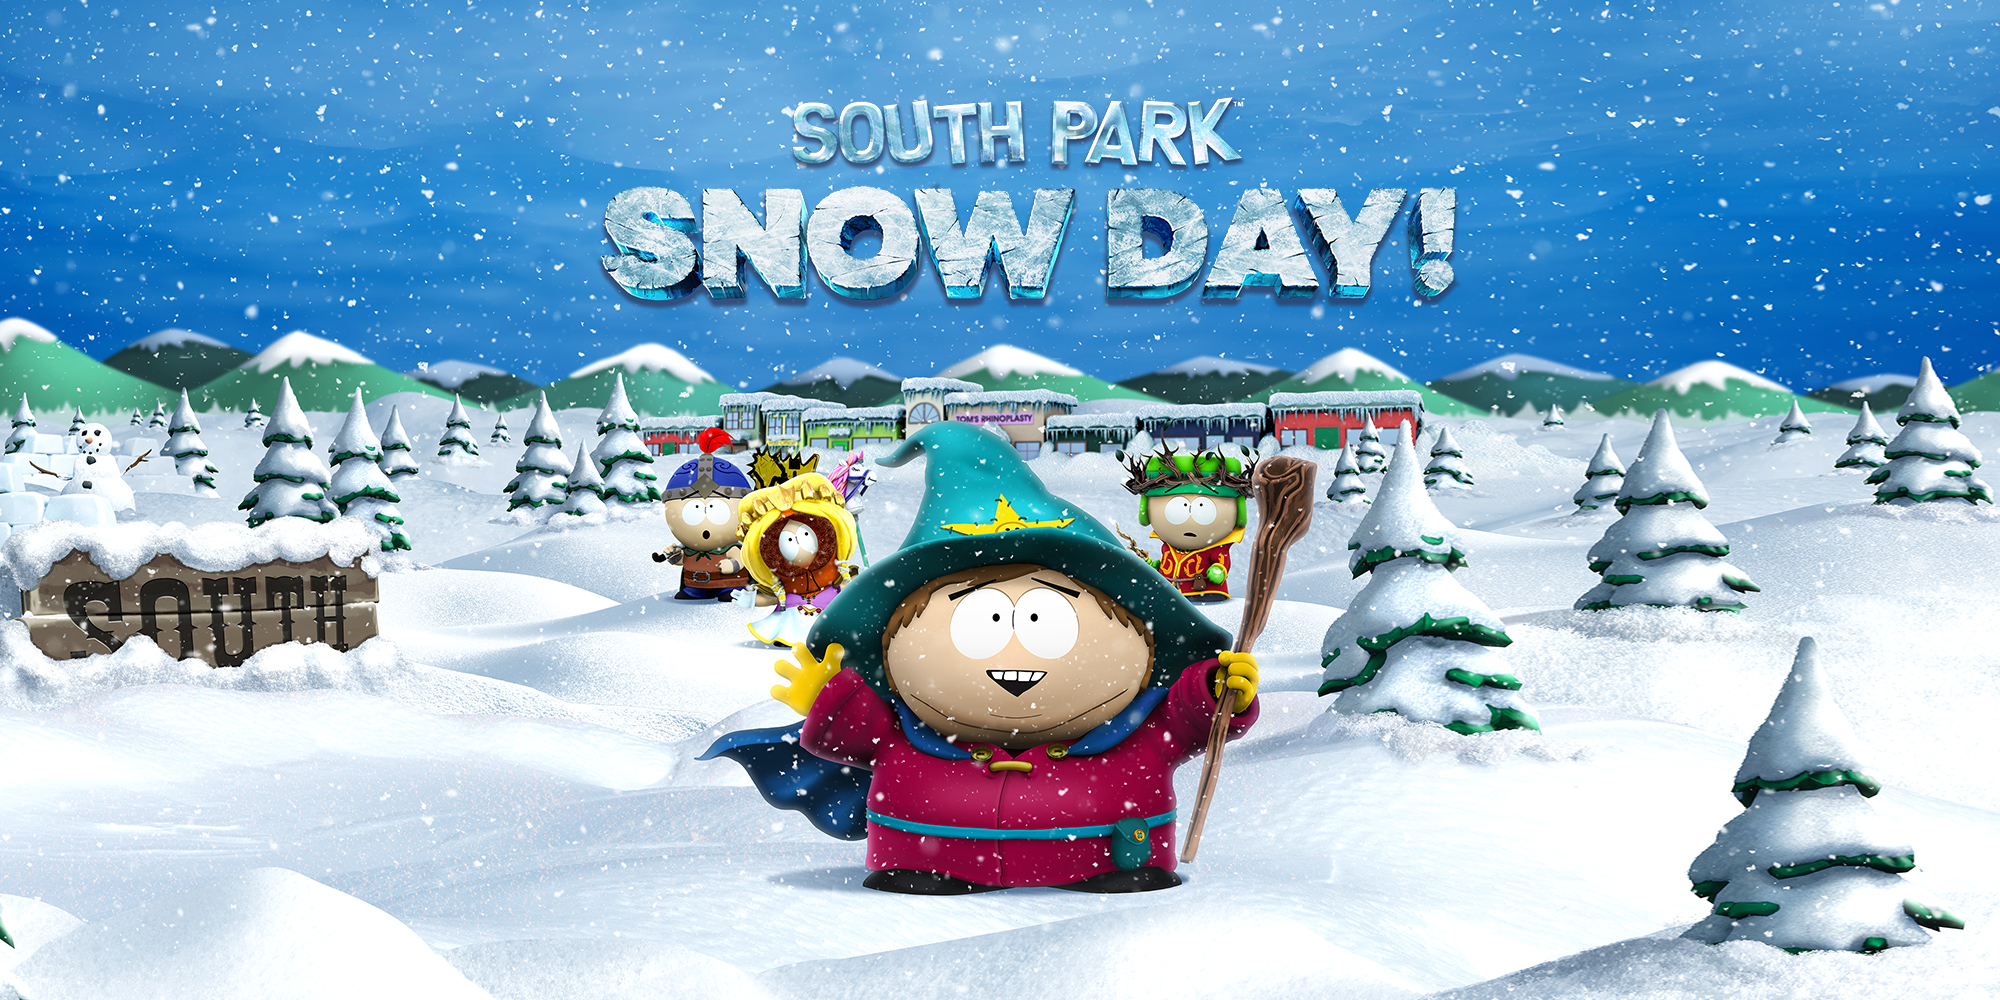 South Park: Snow Day! - Game Switch 